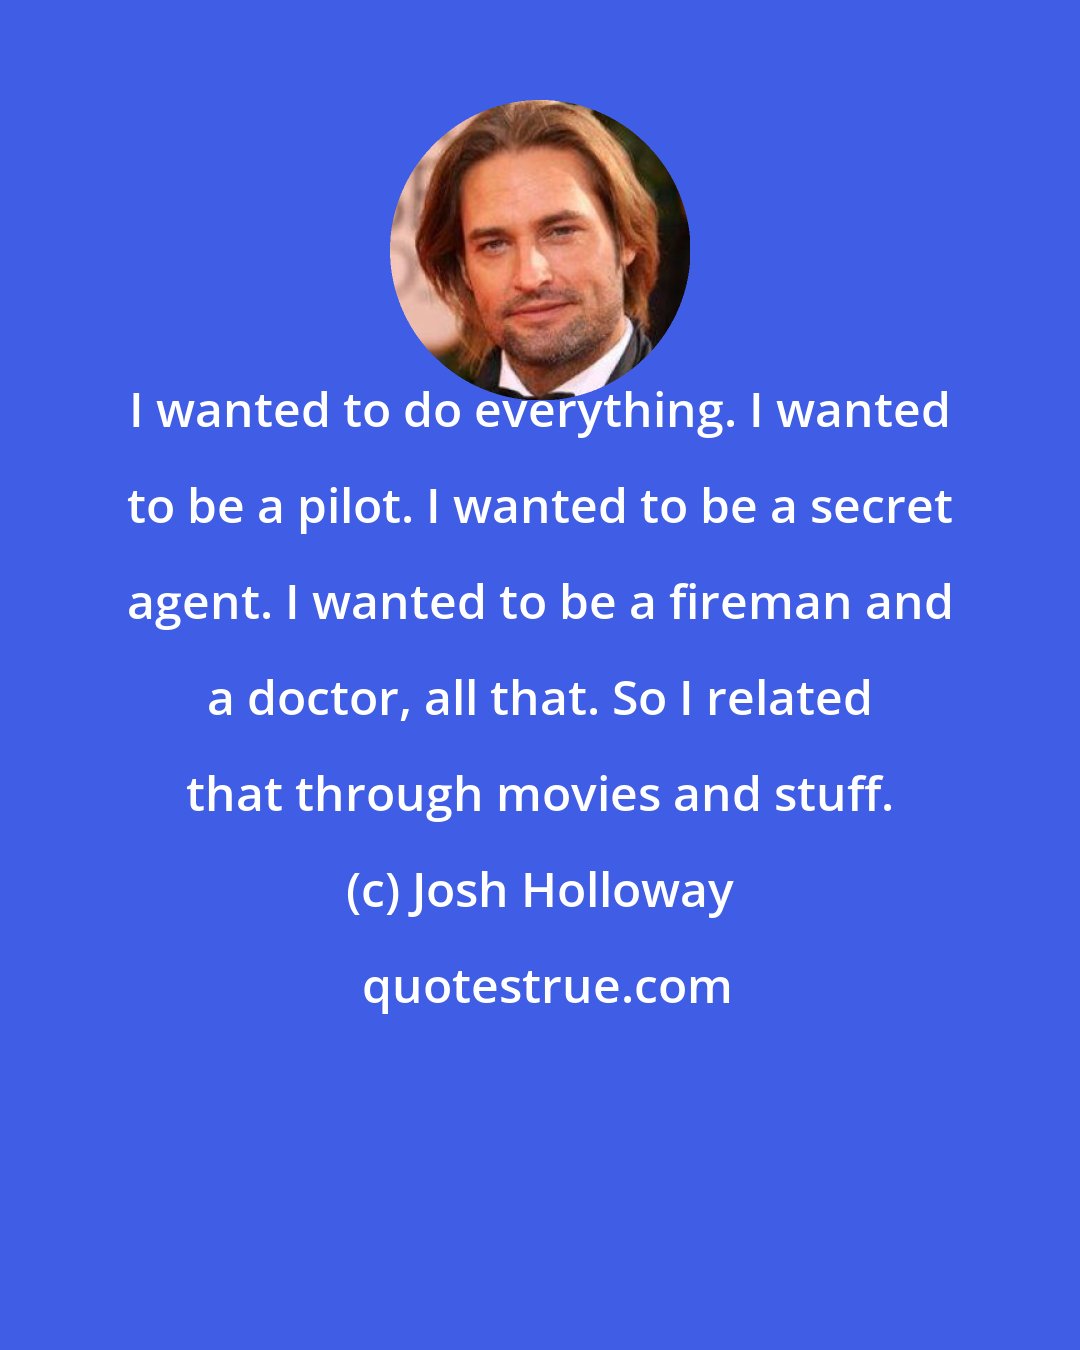 Josh Holloway: I wanted to do everything. I wanted to be a pilot. I wanted to be a secret agent. I wanted to be a fireman and a doctor, all that. So I related that through movies and stuff.